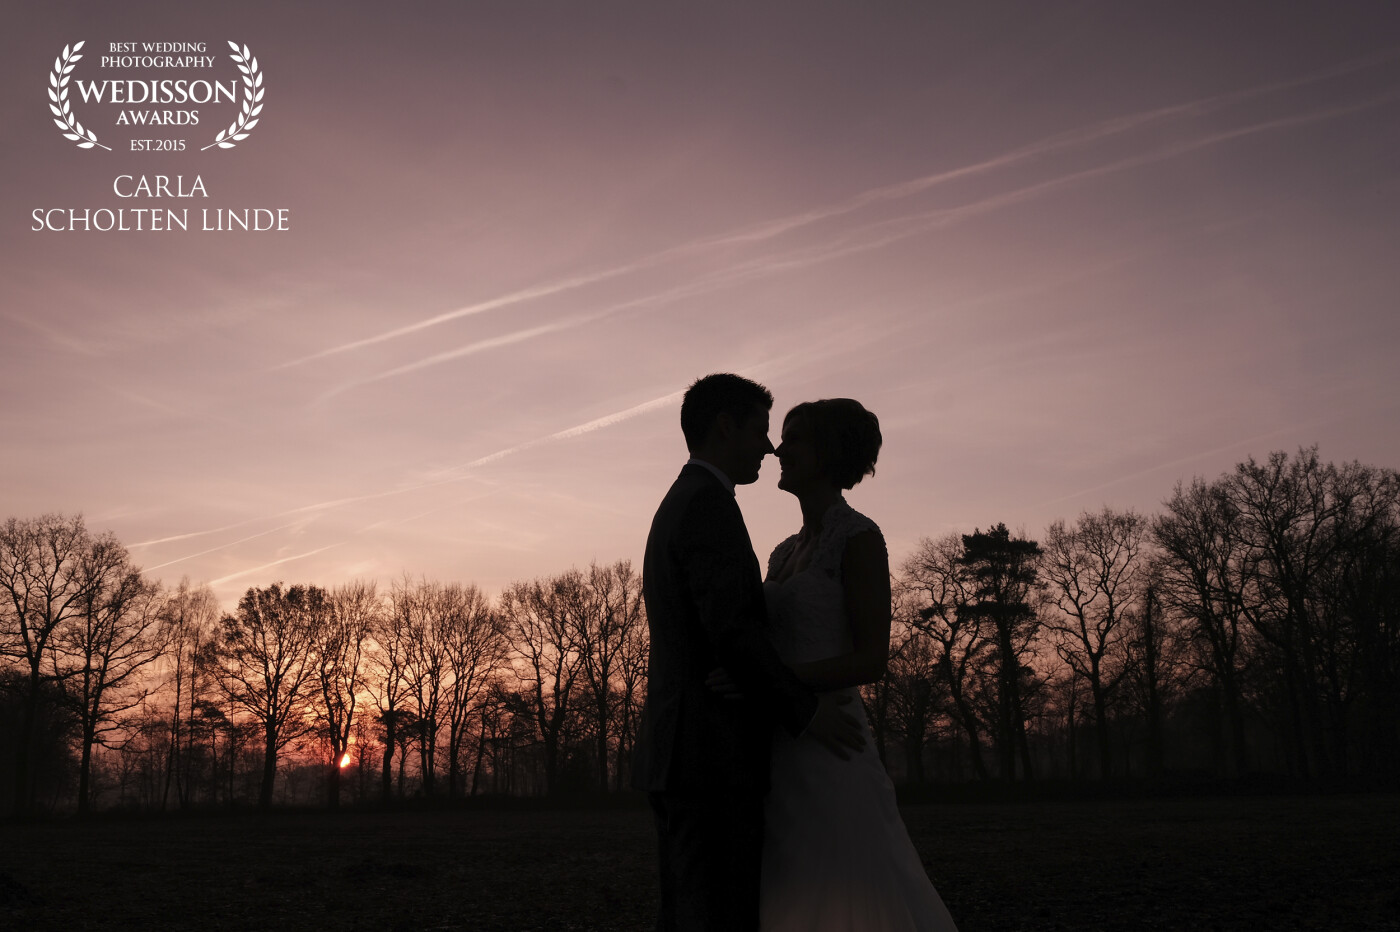 My last wedding in december 2016, early in the morning with a beautiful sunrise in Holland. Cold weather but a lot of love!  That is what I love, weddingphotography just timeless and pure.